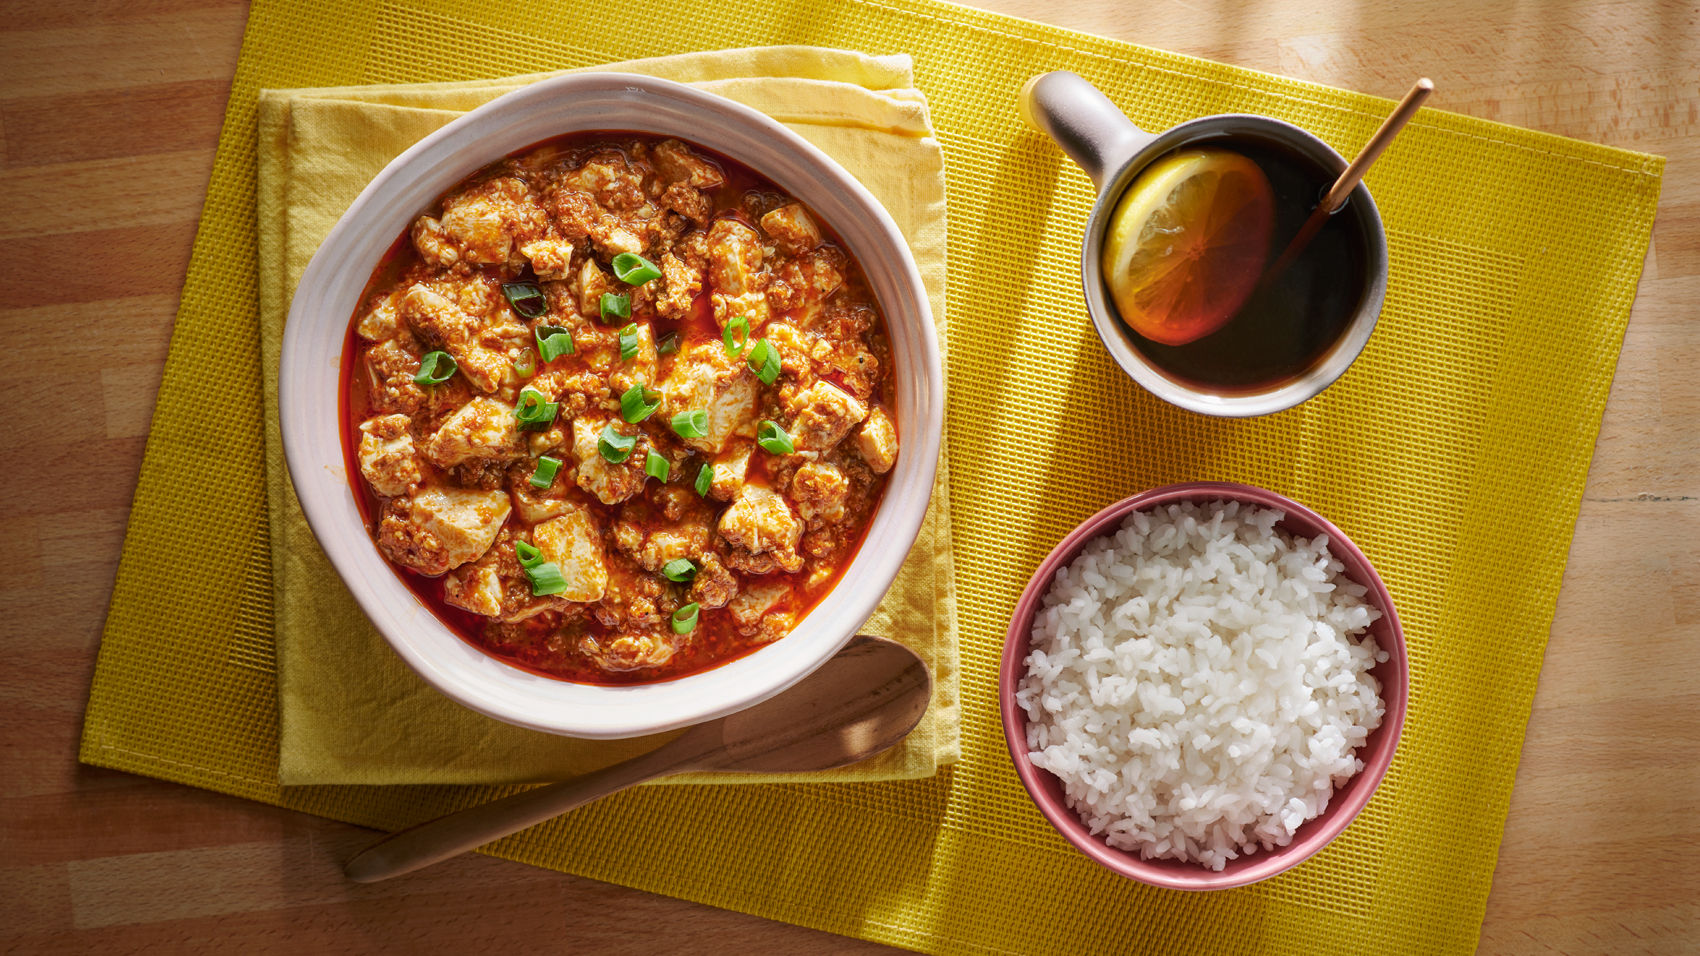 Plant-Based Minced Meat Mapo Tofu With Rice